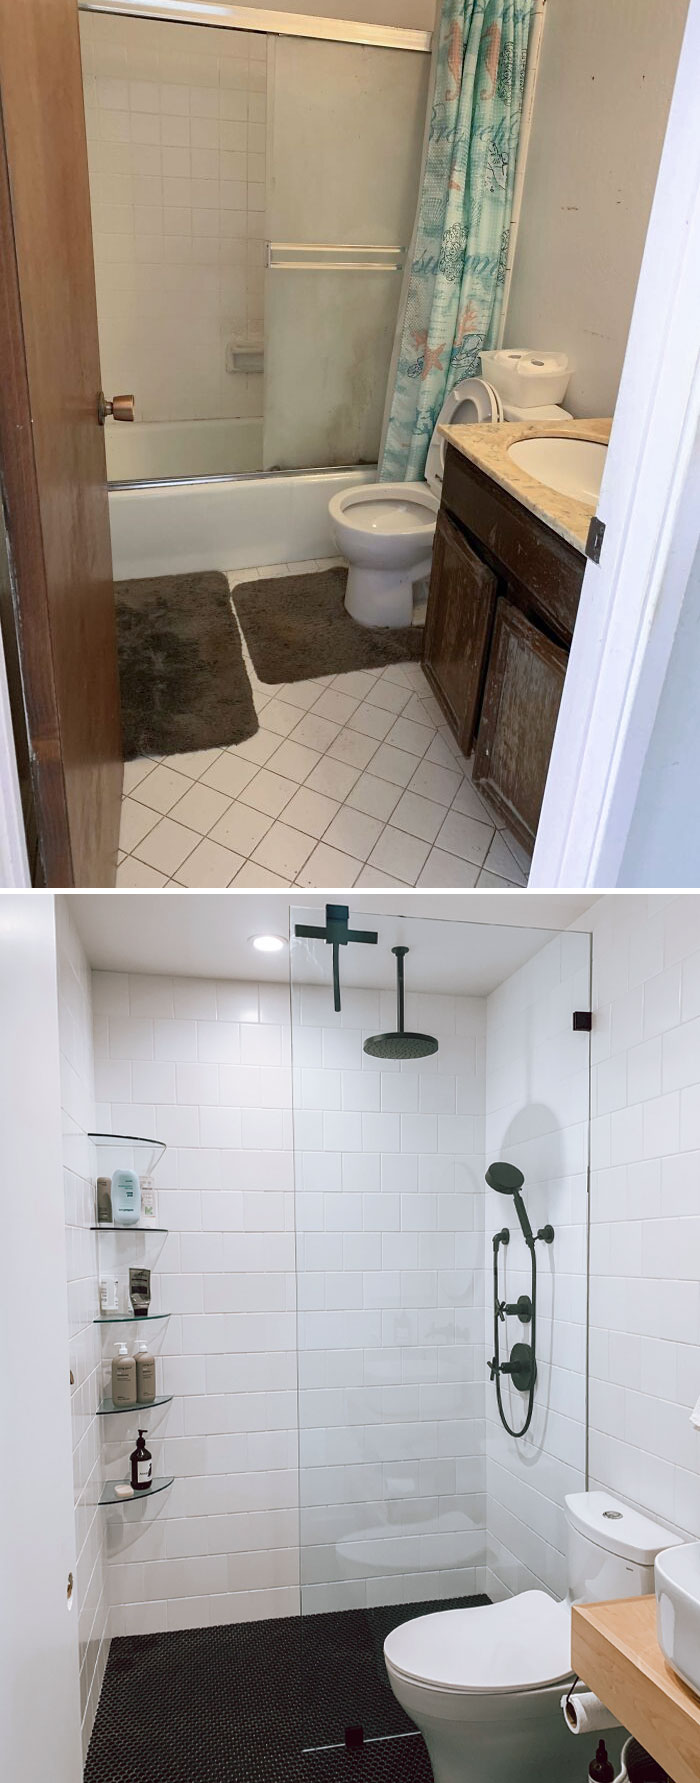 Before And After Of My Bathroom Remodel